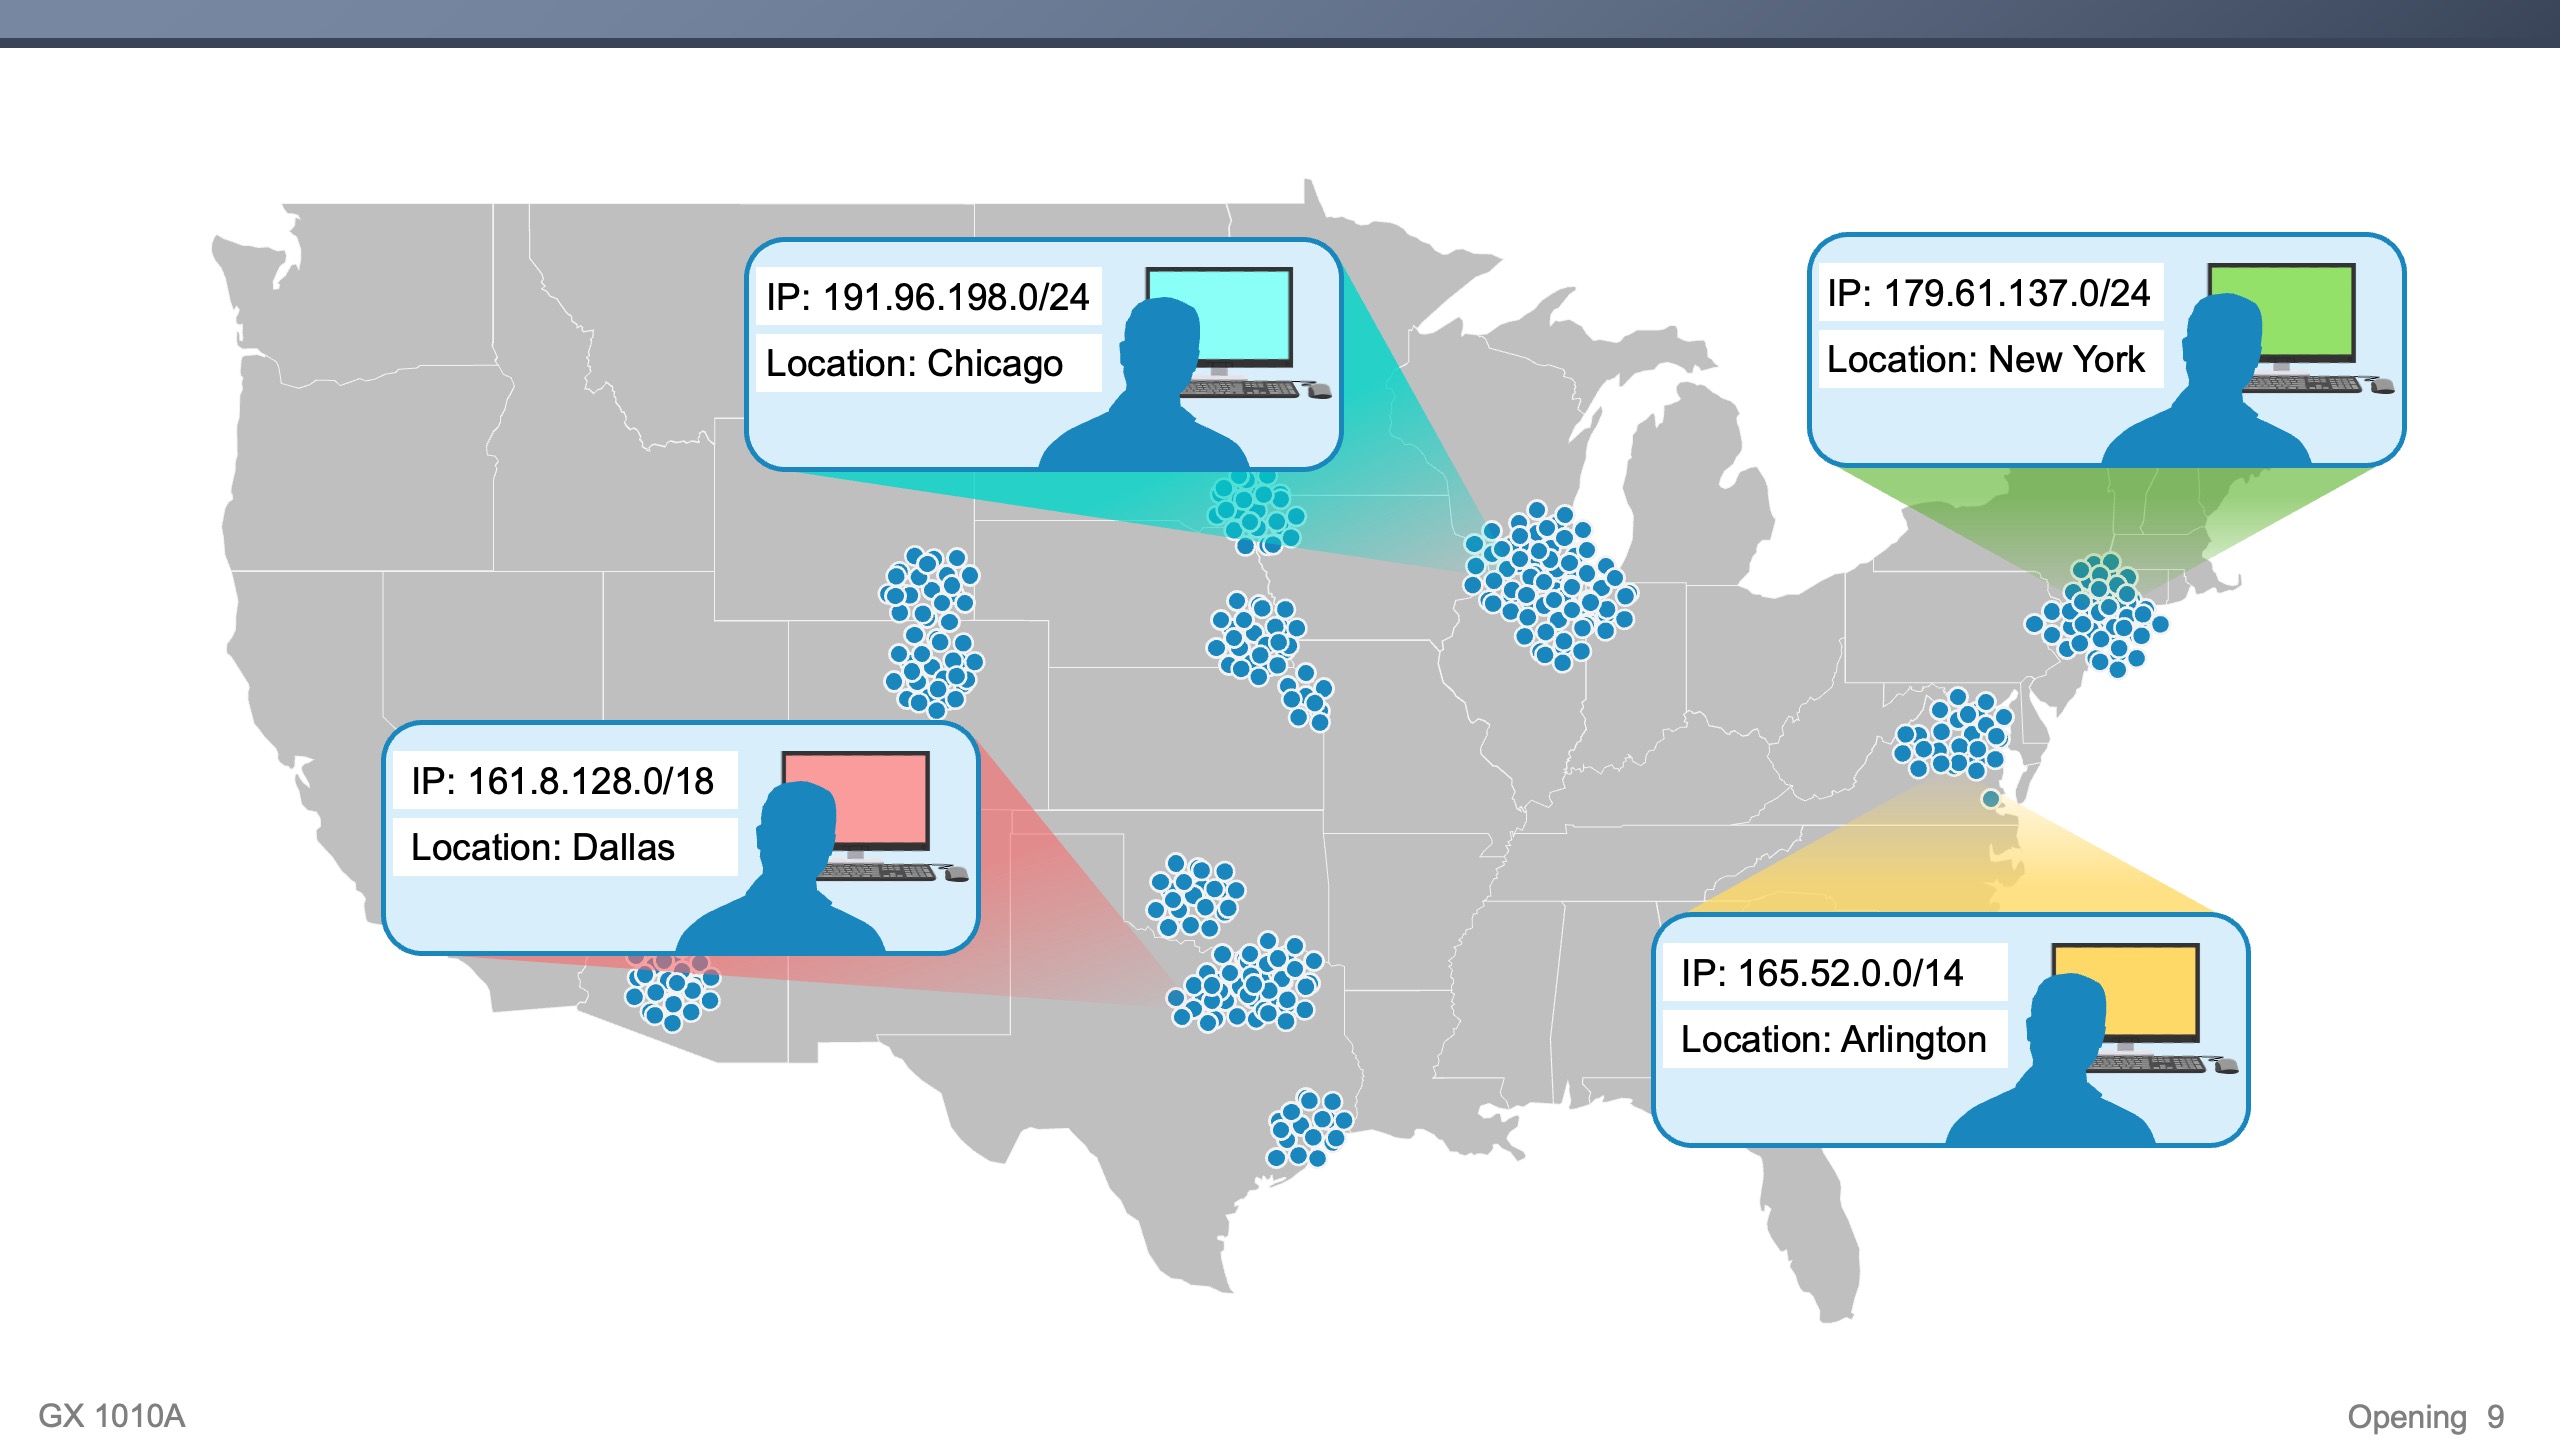 Illustration showing focus on IP addresses from different locations in the U.S. such as Chicago, Dallas, Arlington and New York.